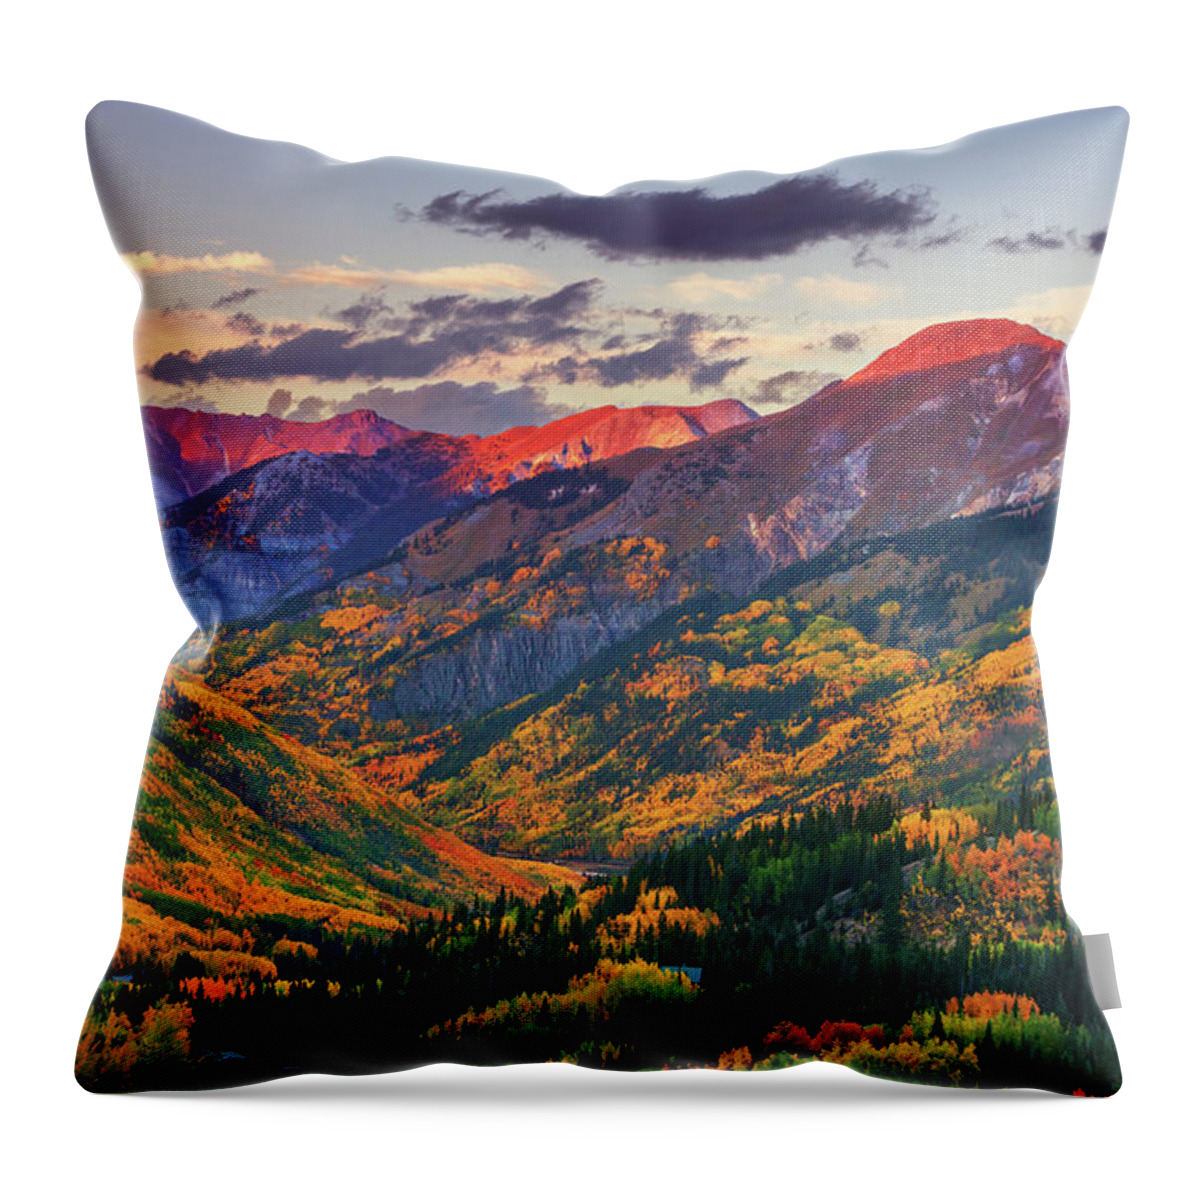 Colorado Throw Pillow featuring the photograph Red Mountain Pass Sunset by Darren White